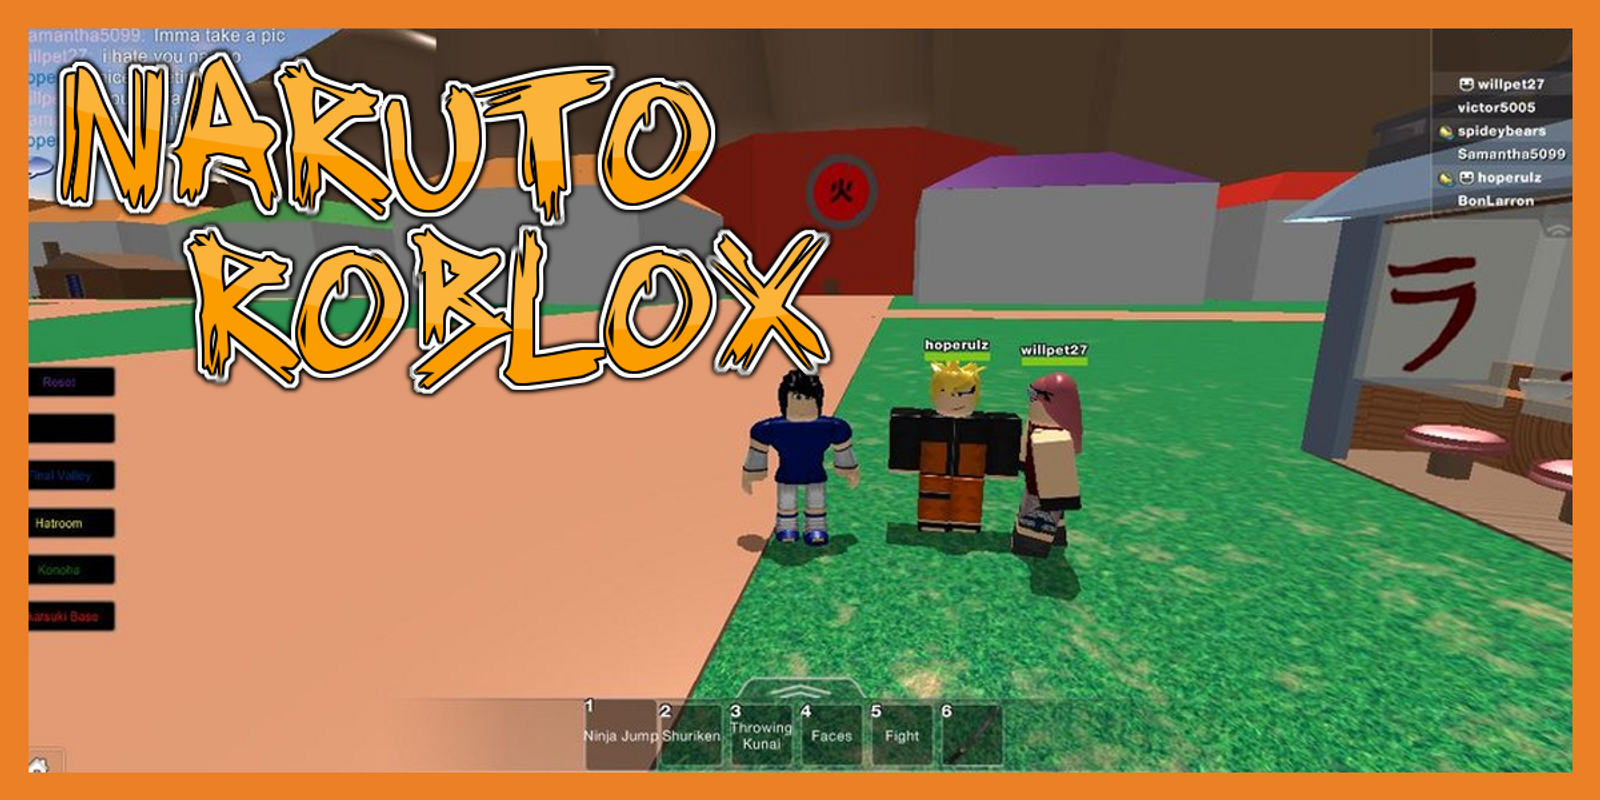 Roblox Apk Para Pc Roblox Free Level 7 Exploit 2019 - roblox download for free on pc